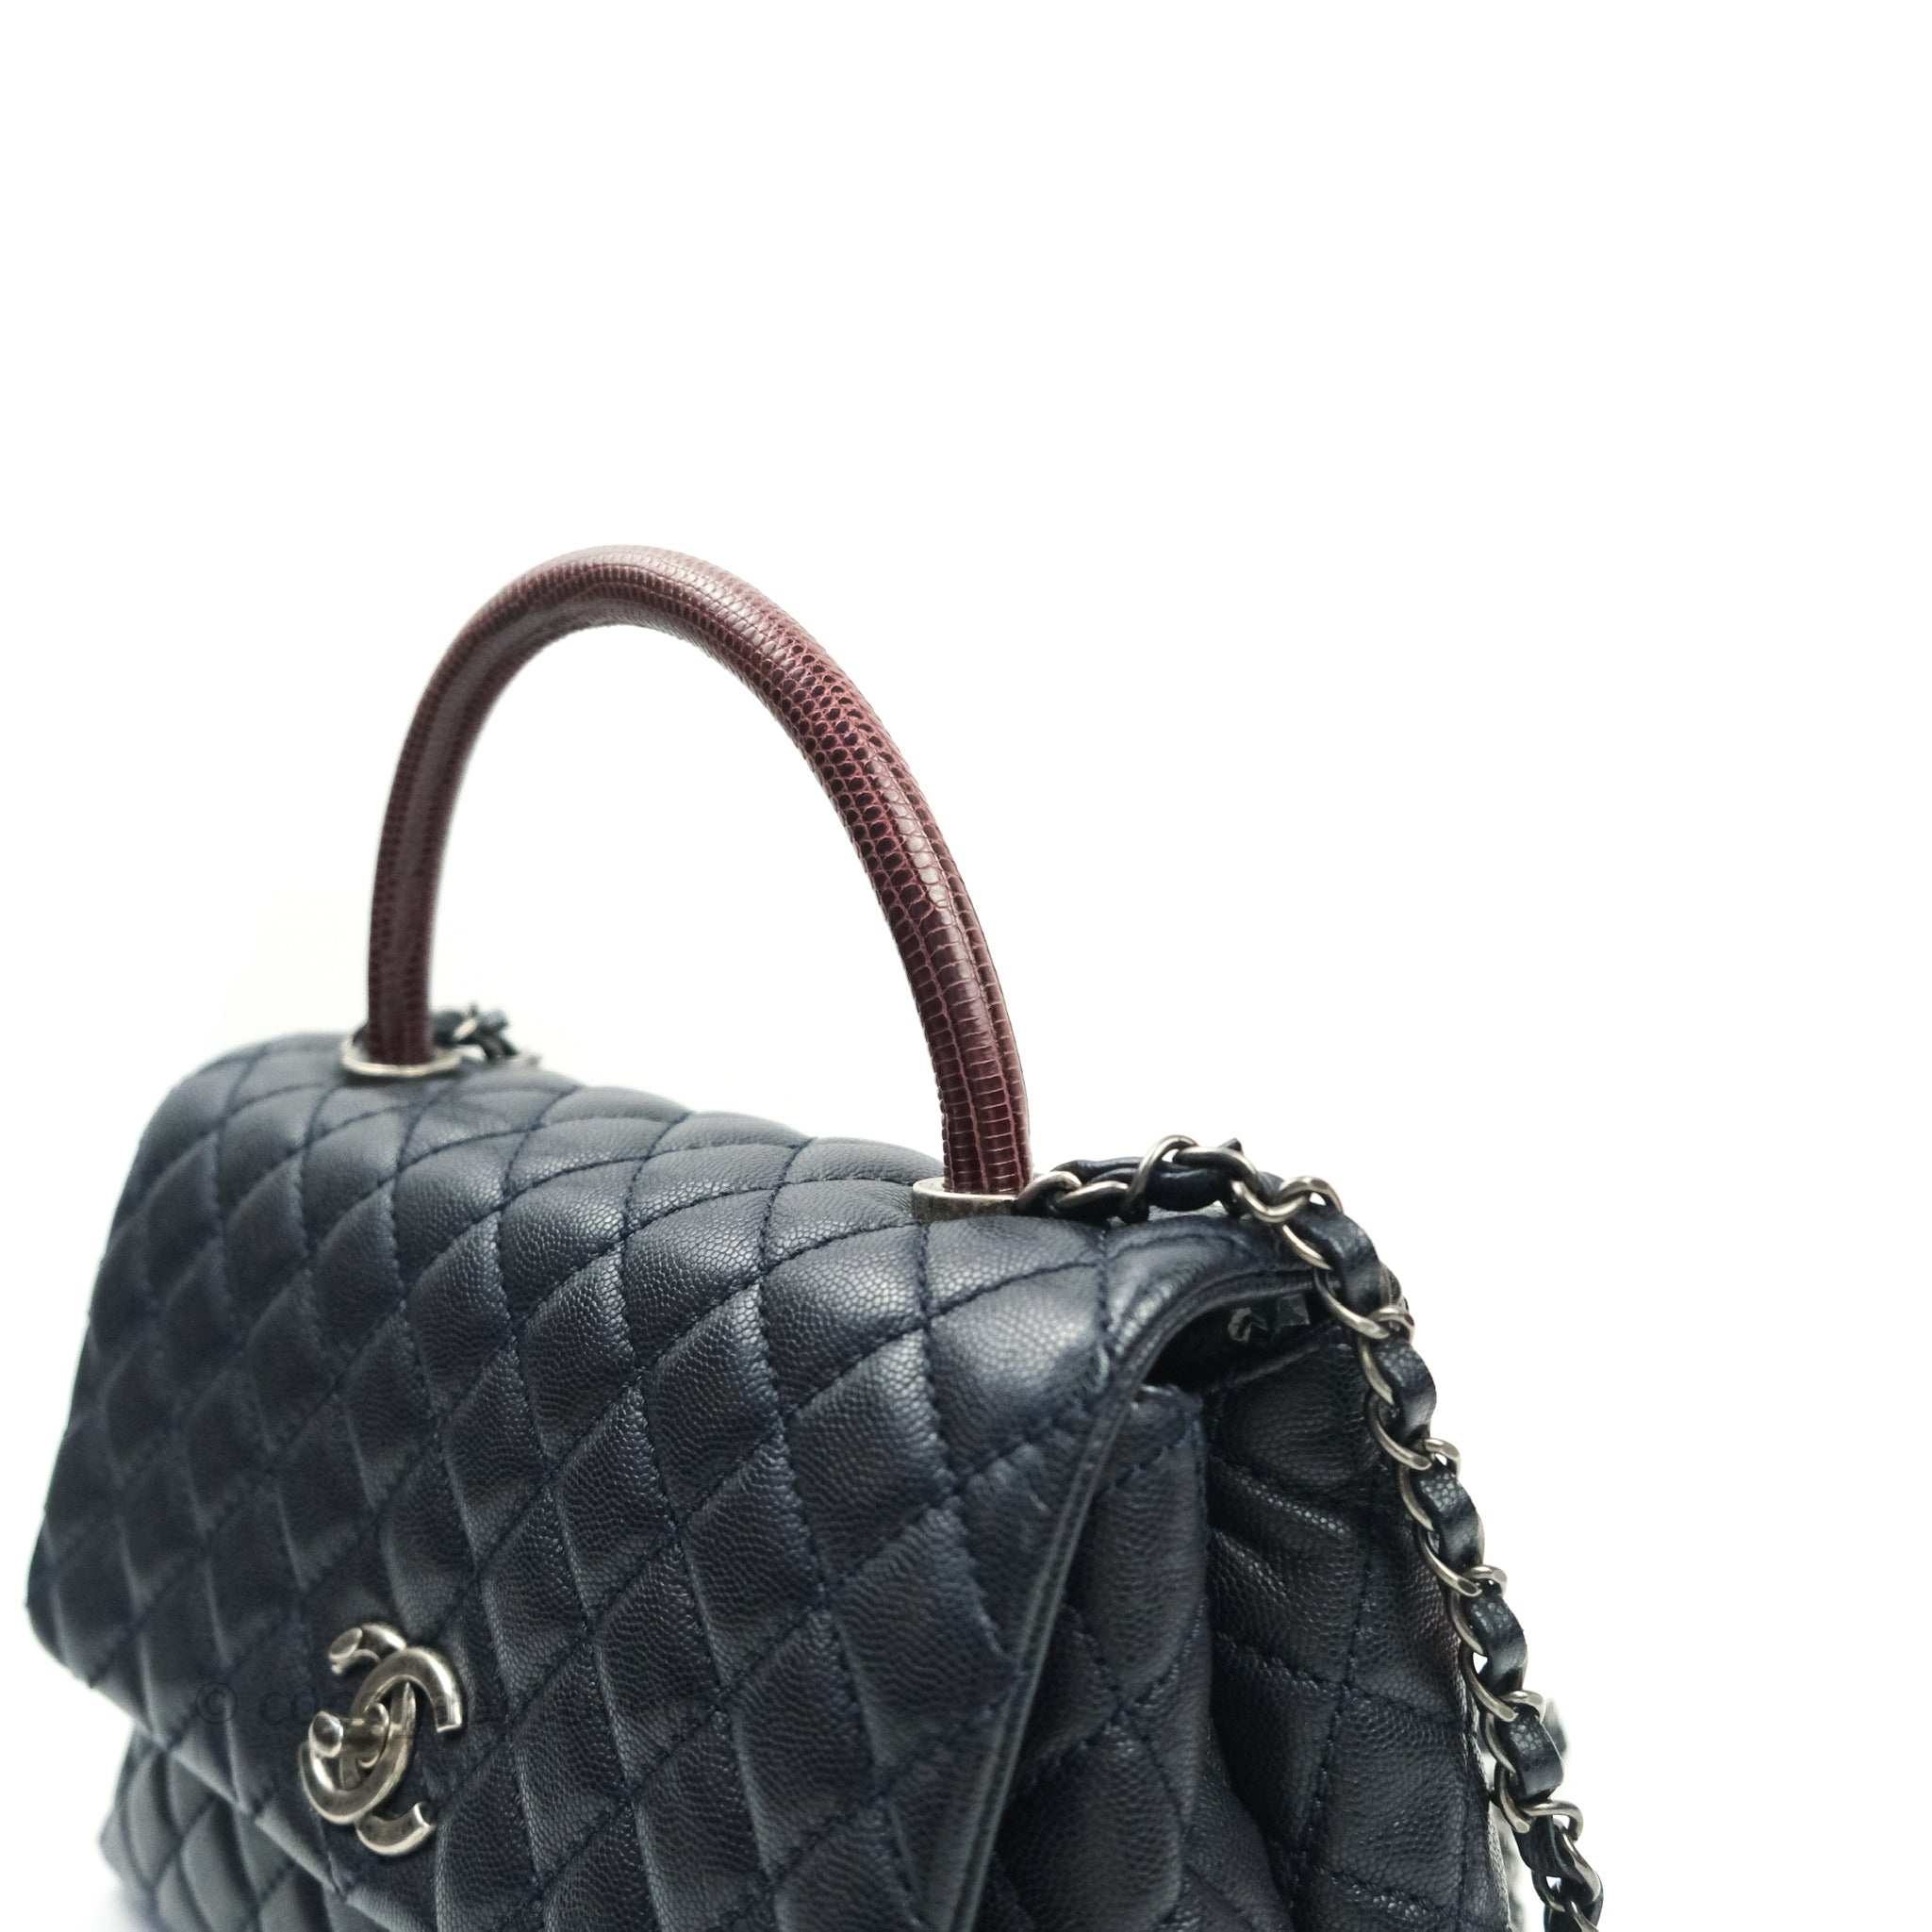 CHANEL Caviar Lizard Embossed Quilted Mini Coco Handle Flap Beige, FASHIONPHILE